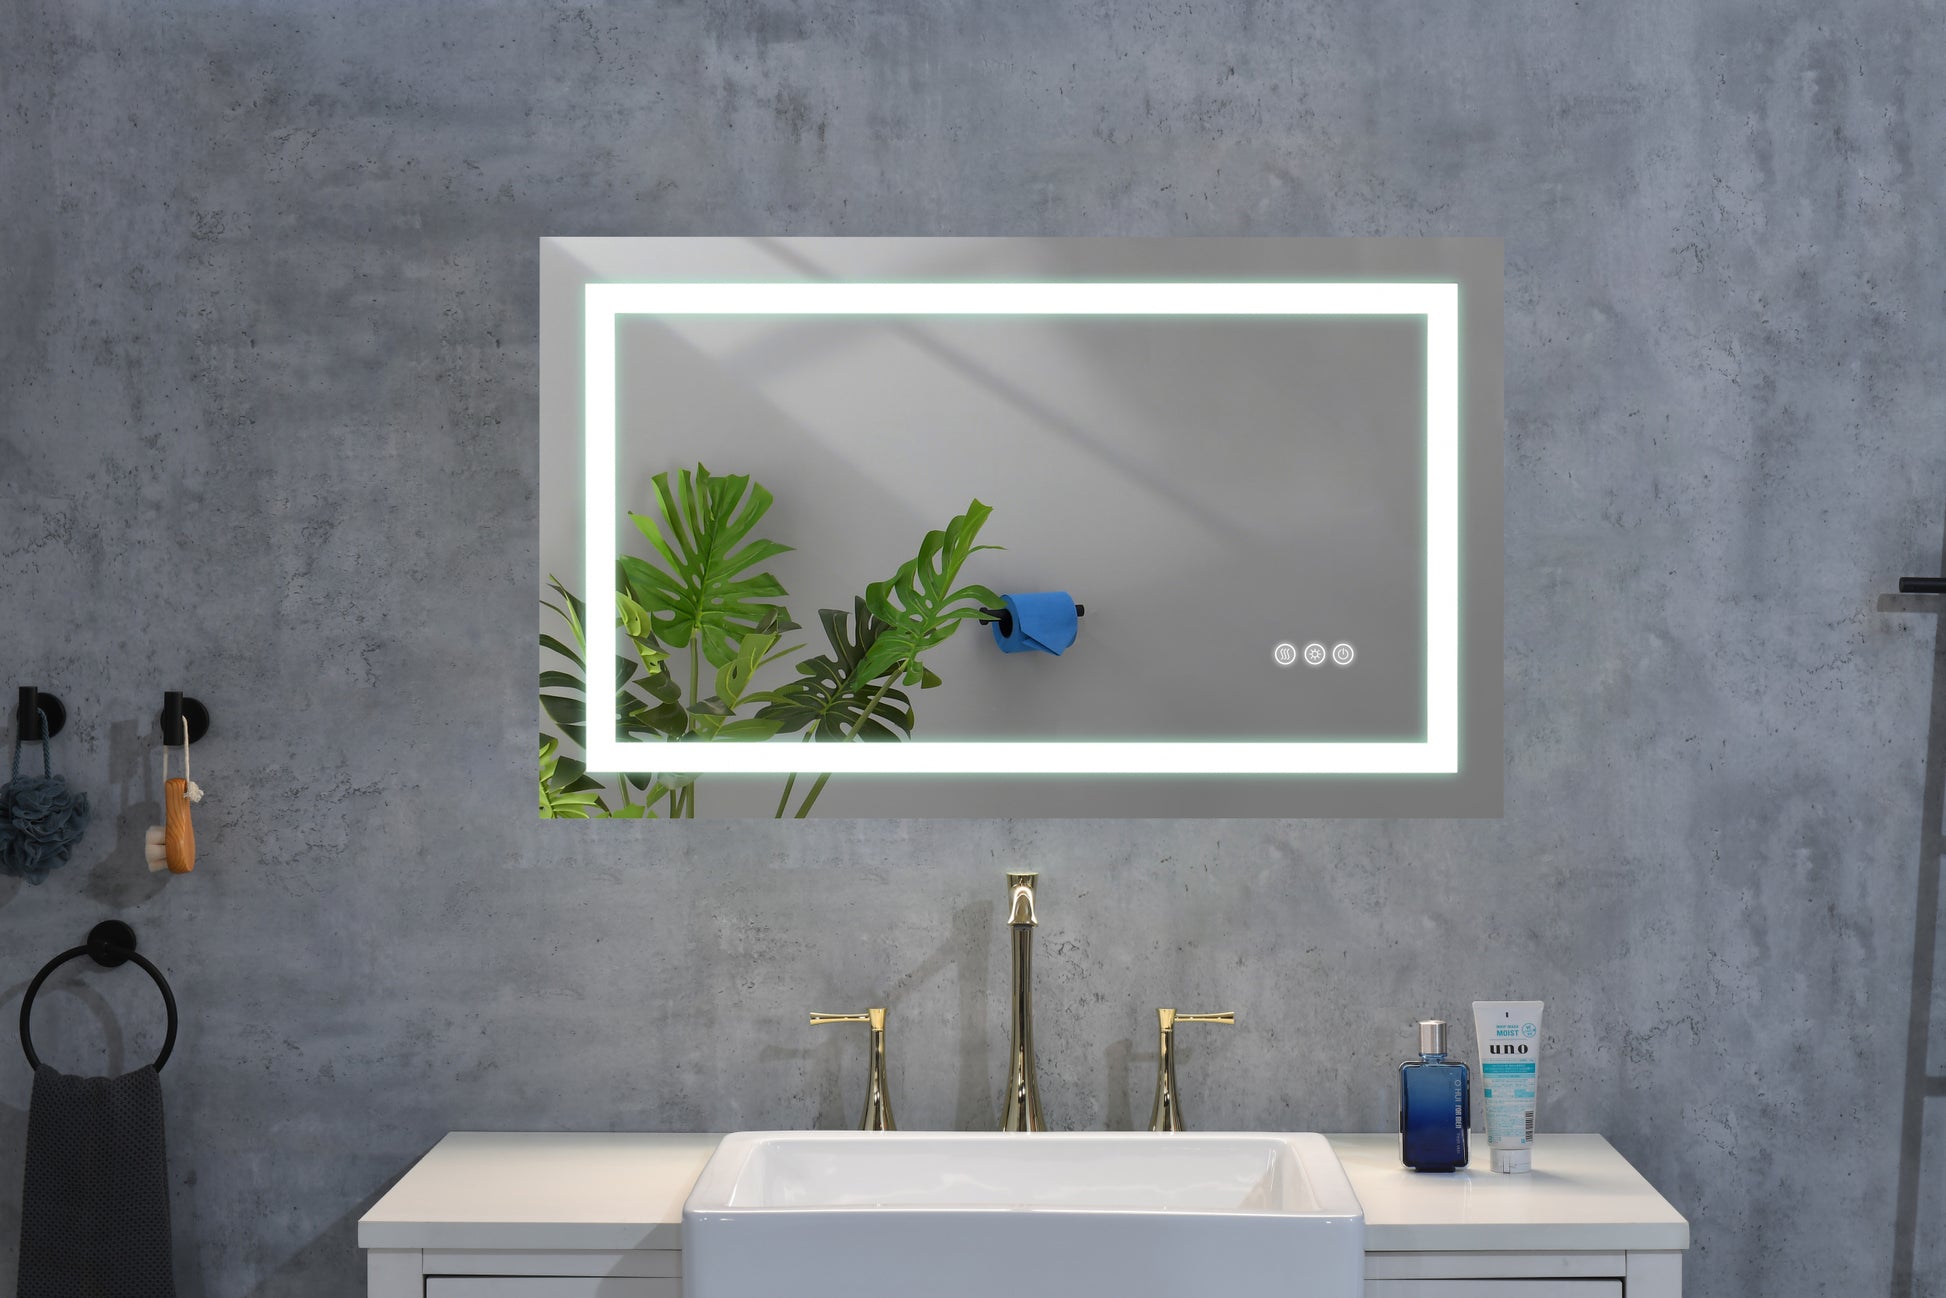 Led Bathroom Mirror 40 "x 32" with Front and